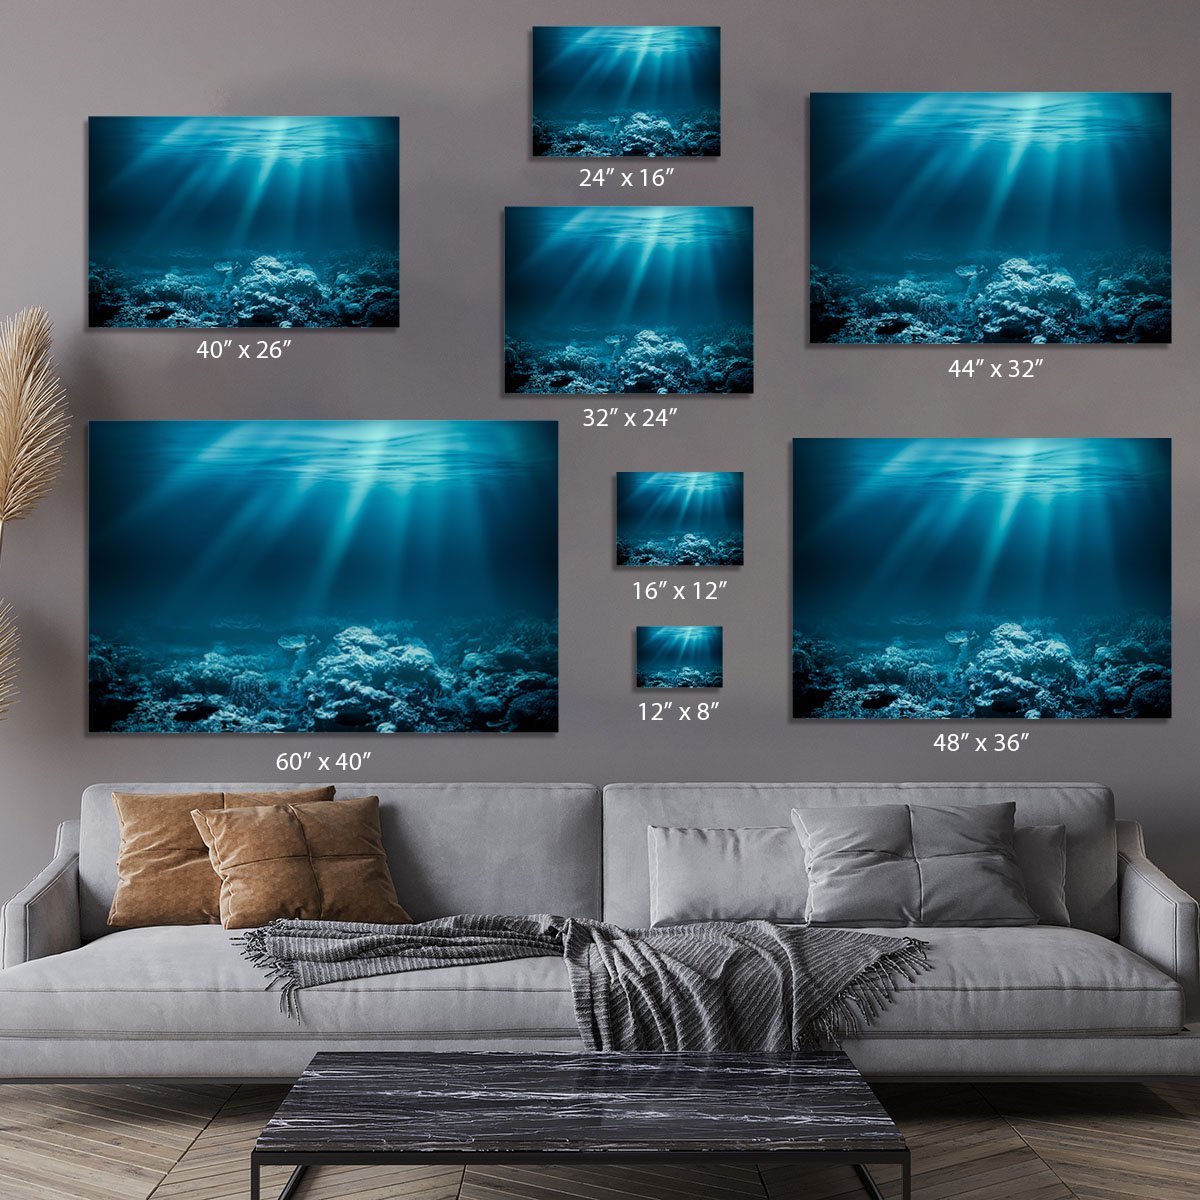 Ocean underwater with coral reef Canvas Print or Poster